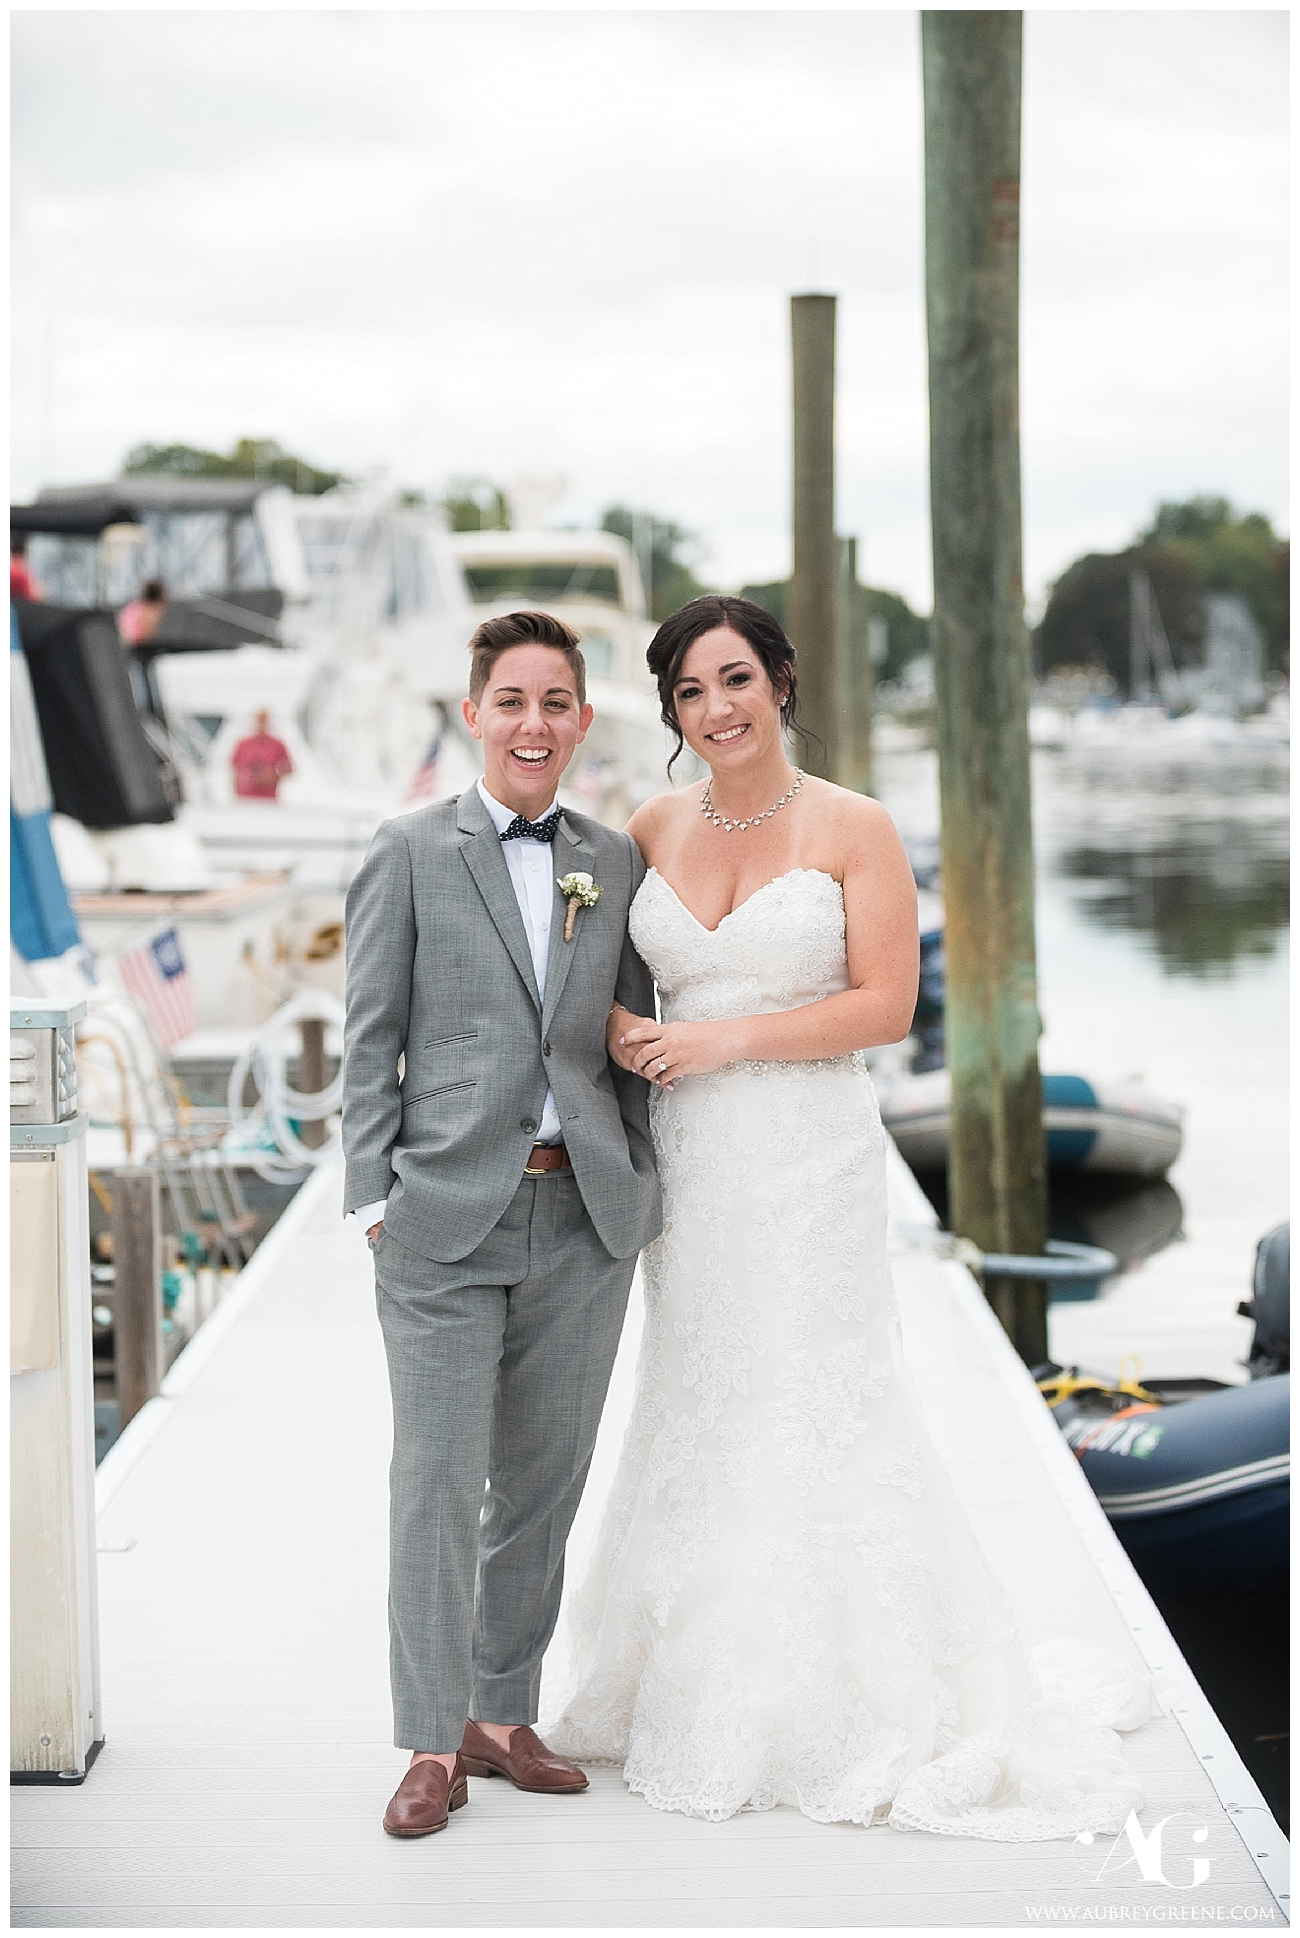 Fall Waterfront Ceremony At Harbor Lights Aubrey Greene Photography